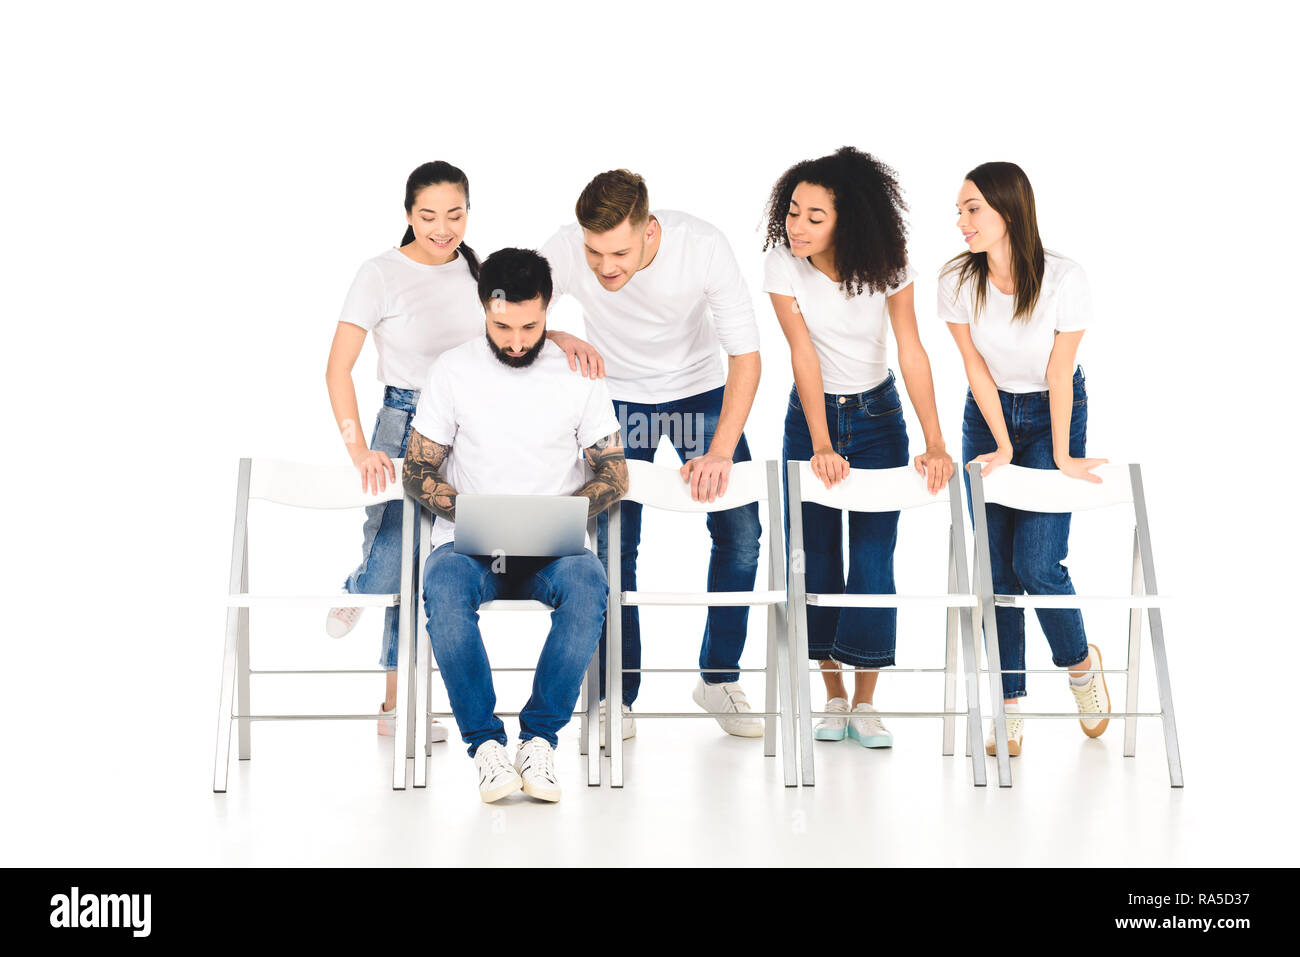 bearded man using laptop while multicultural group of young people standing behind and looking at screen isolated on white Stock Photo